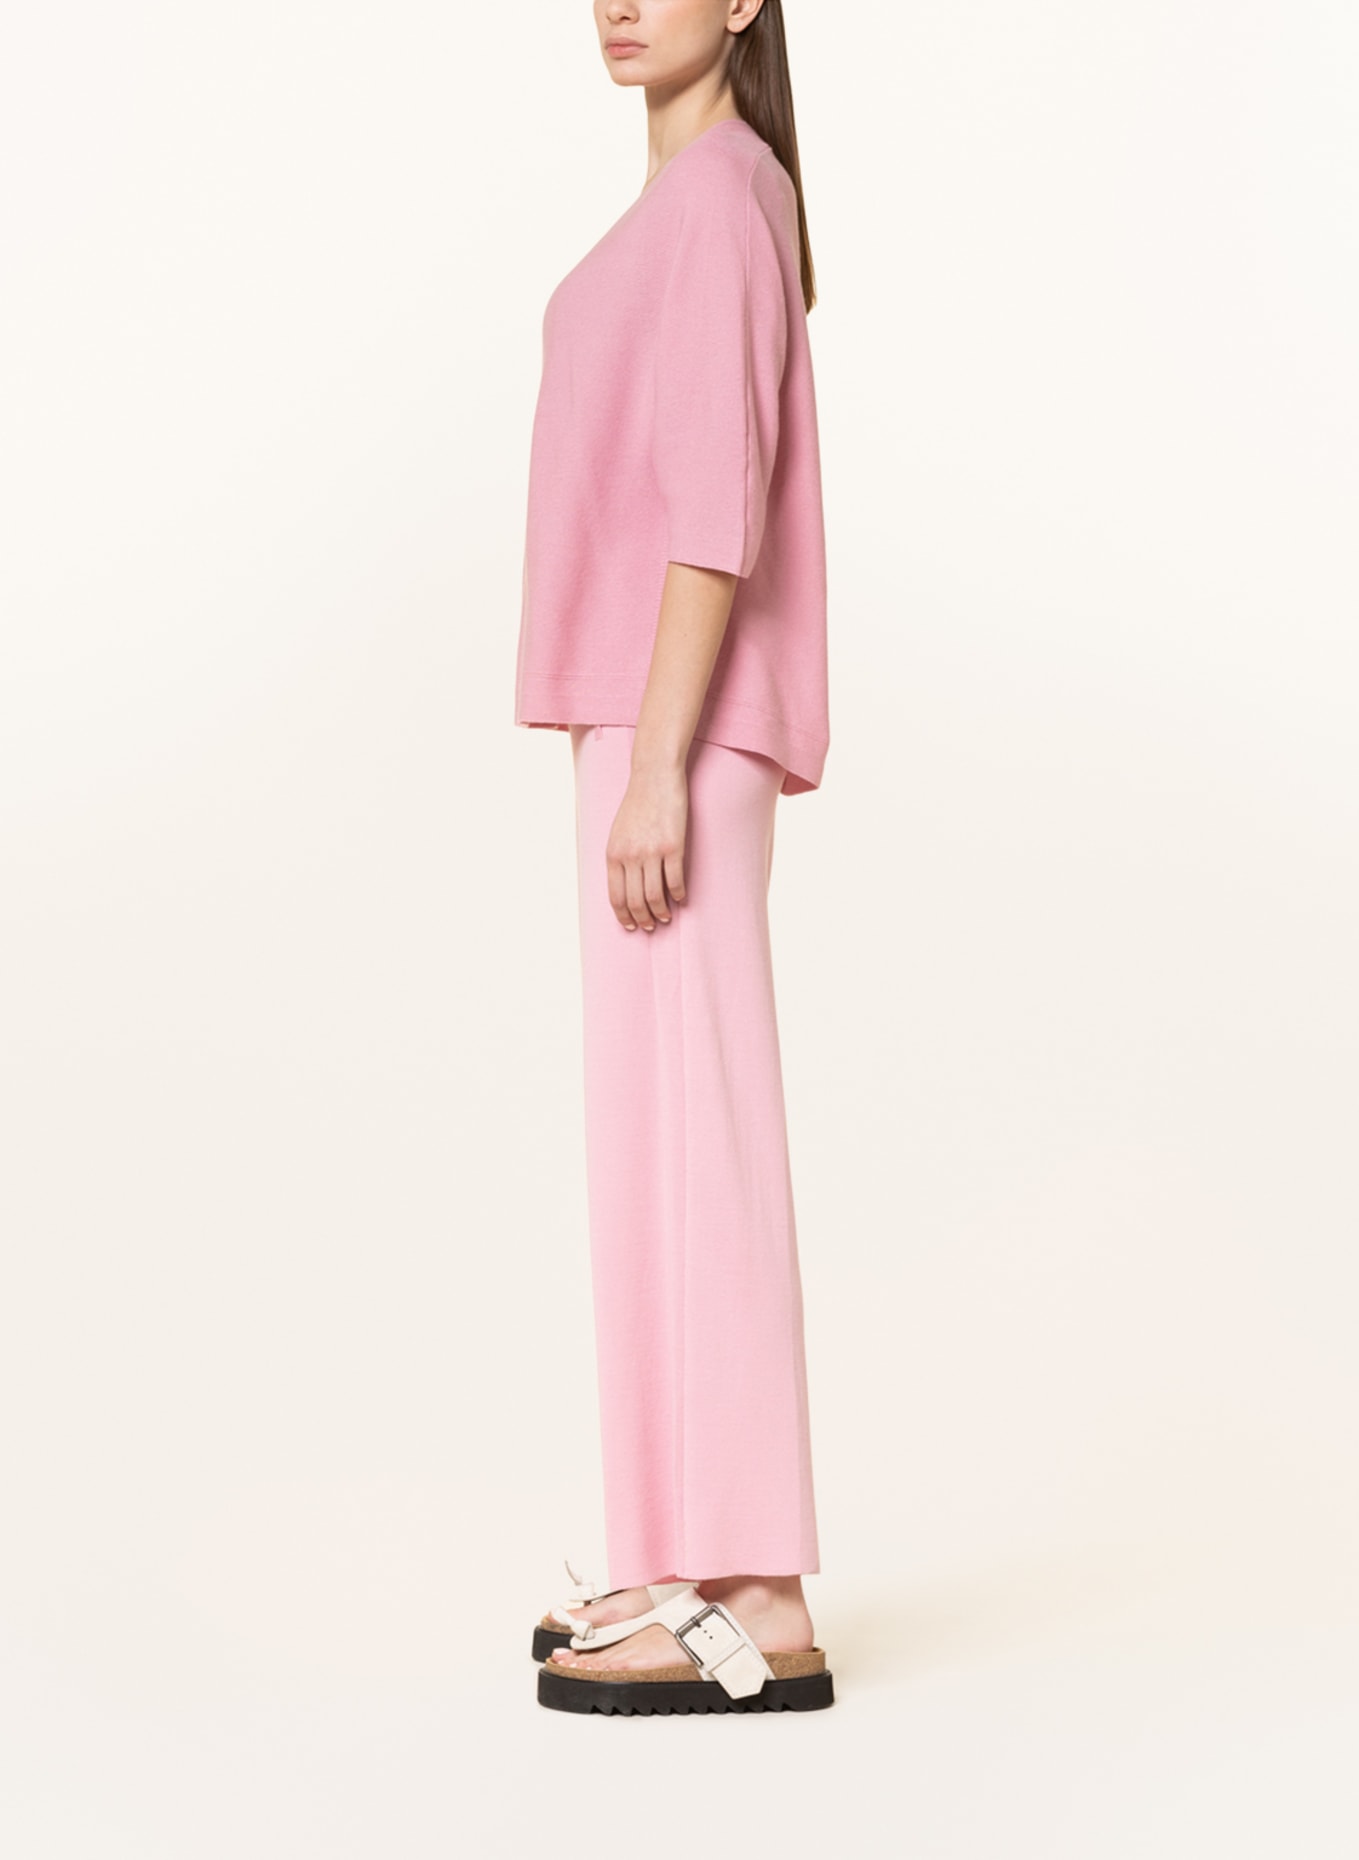 HEMISPHERE Pants in jogger style, Color: PINK (Image 4)